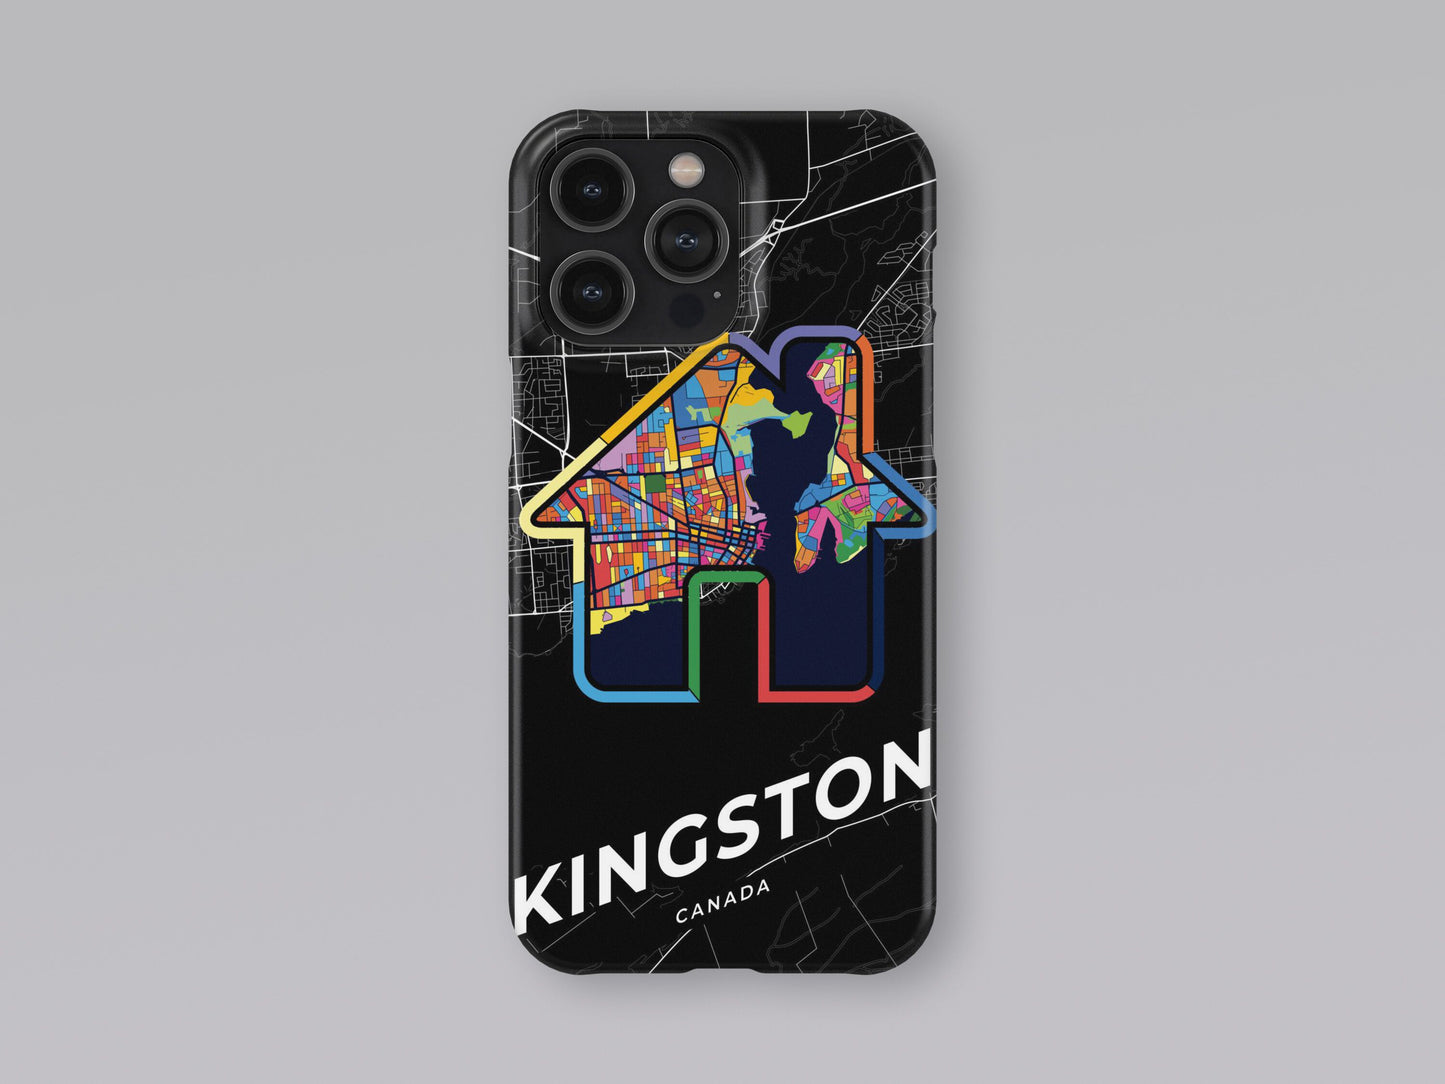 Kingston Canada slim phone case with colorful icon. Birthday, wedding or housewarming gift. Couple match cases. 3